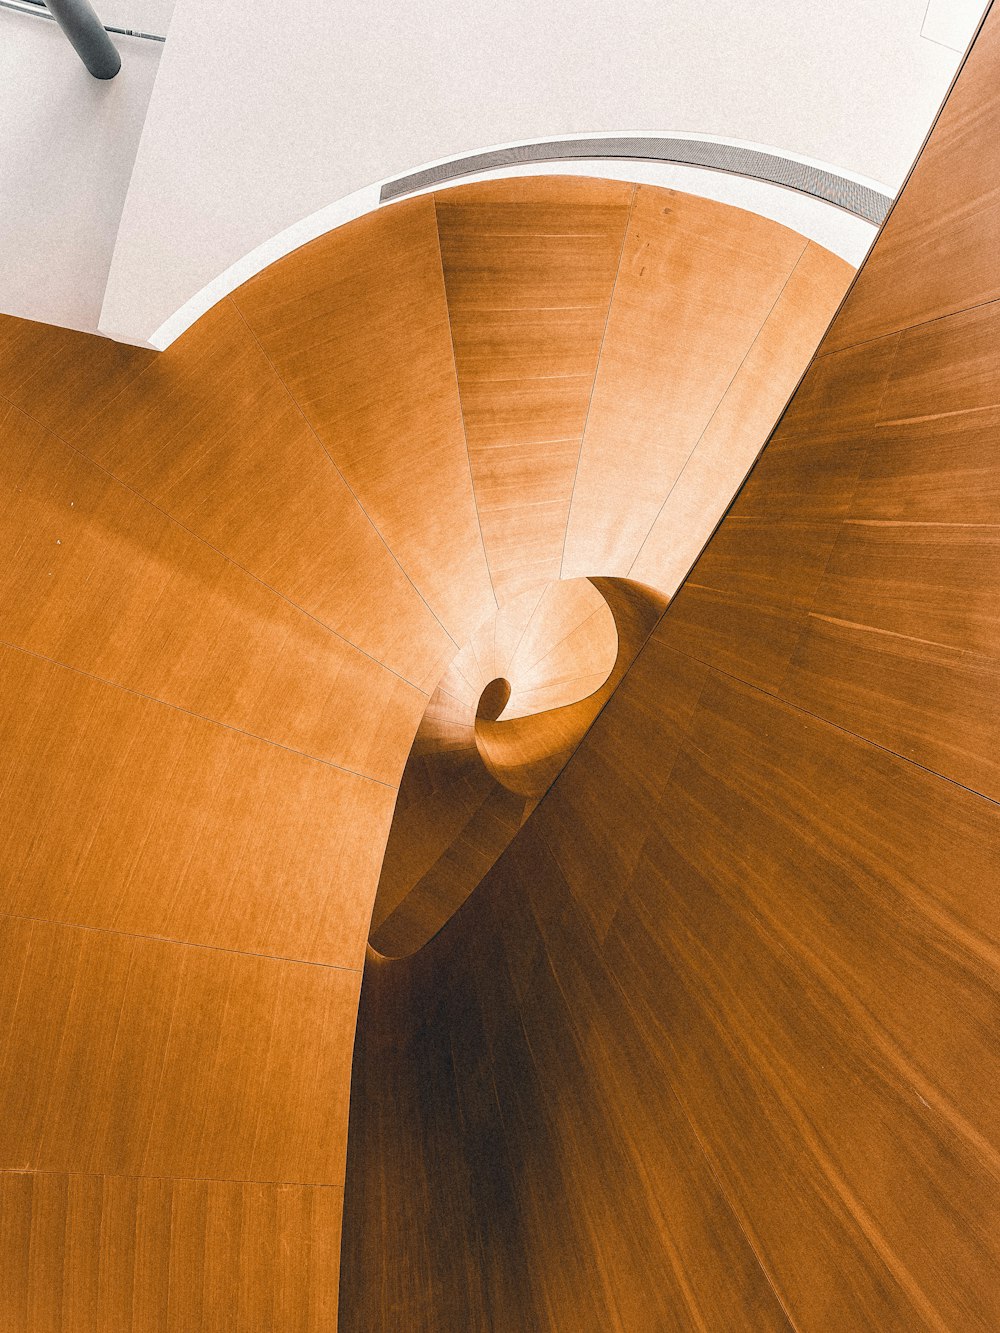 a wooden spiral staircase in a building